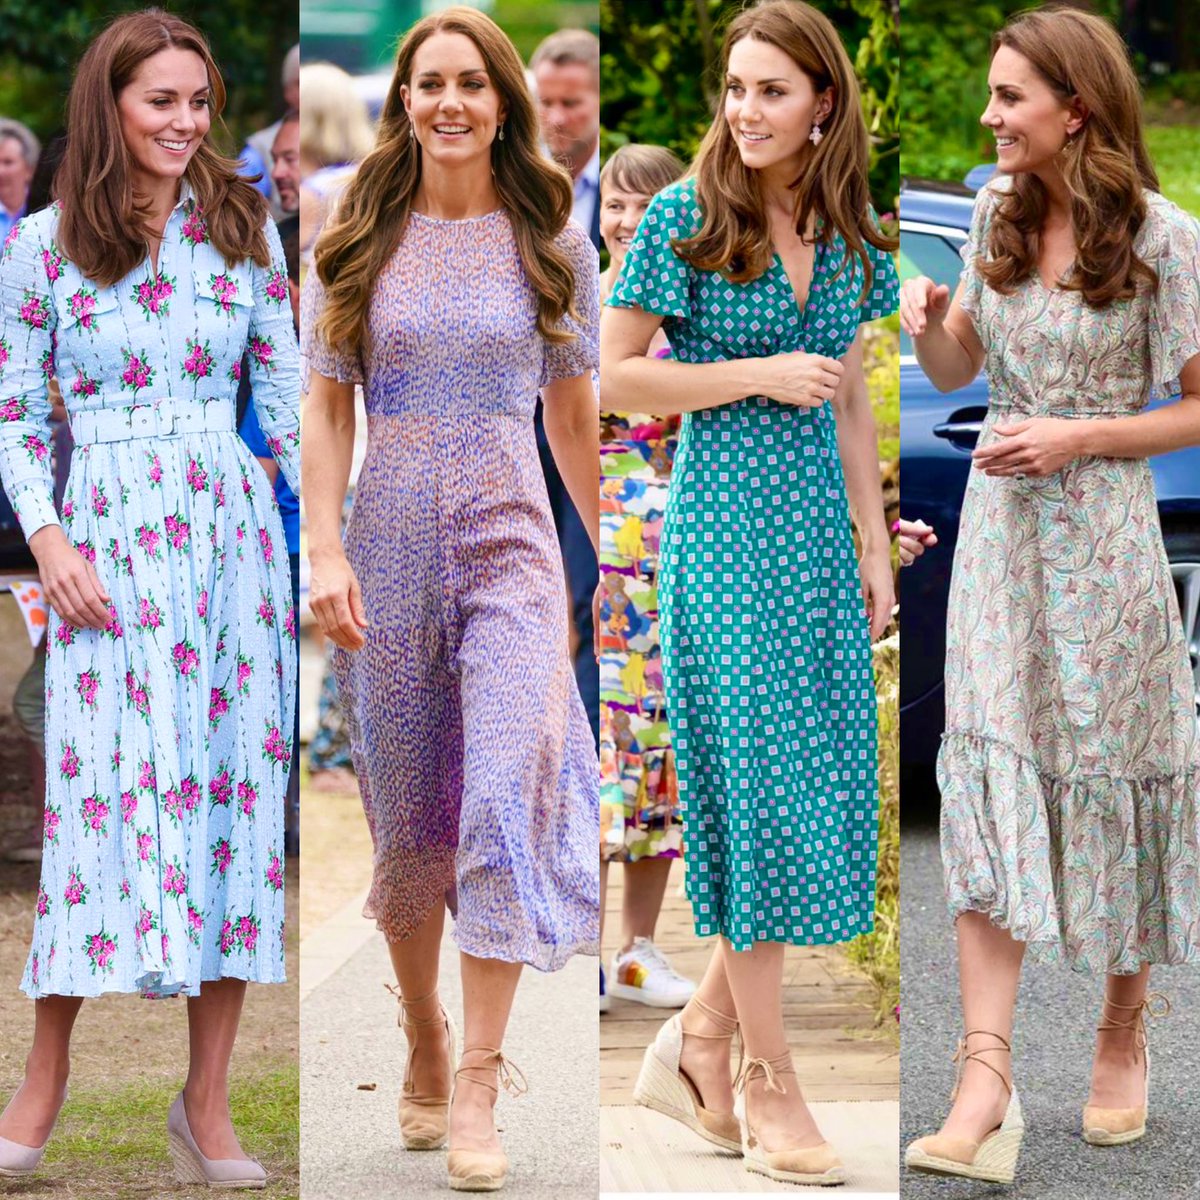 The Princess of Wales in spring/summer dresses 🌸☀️